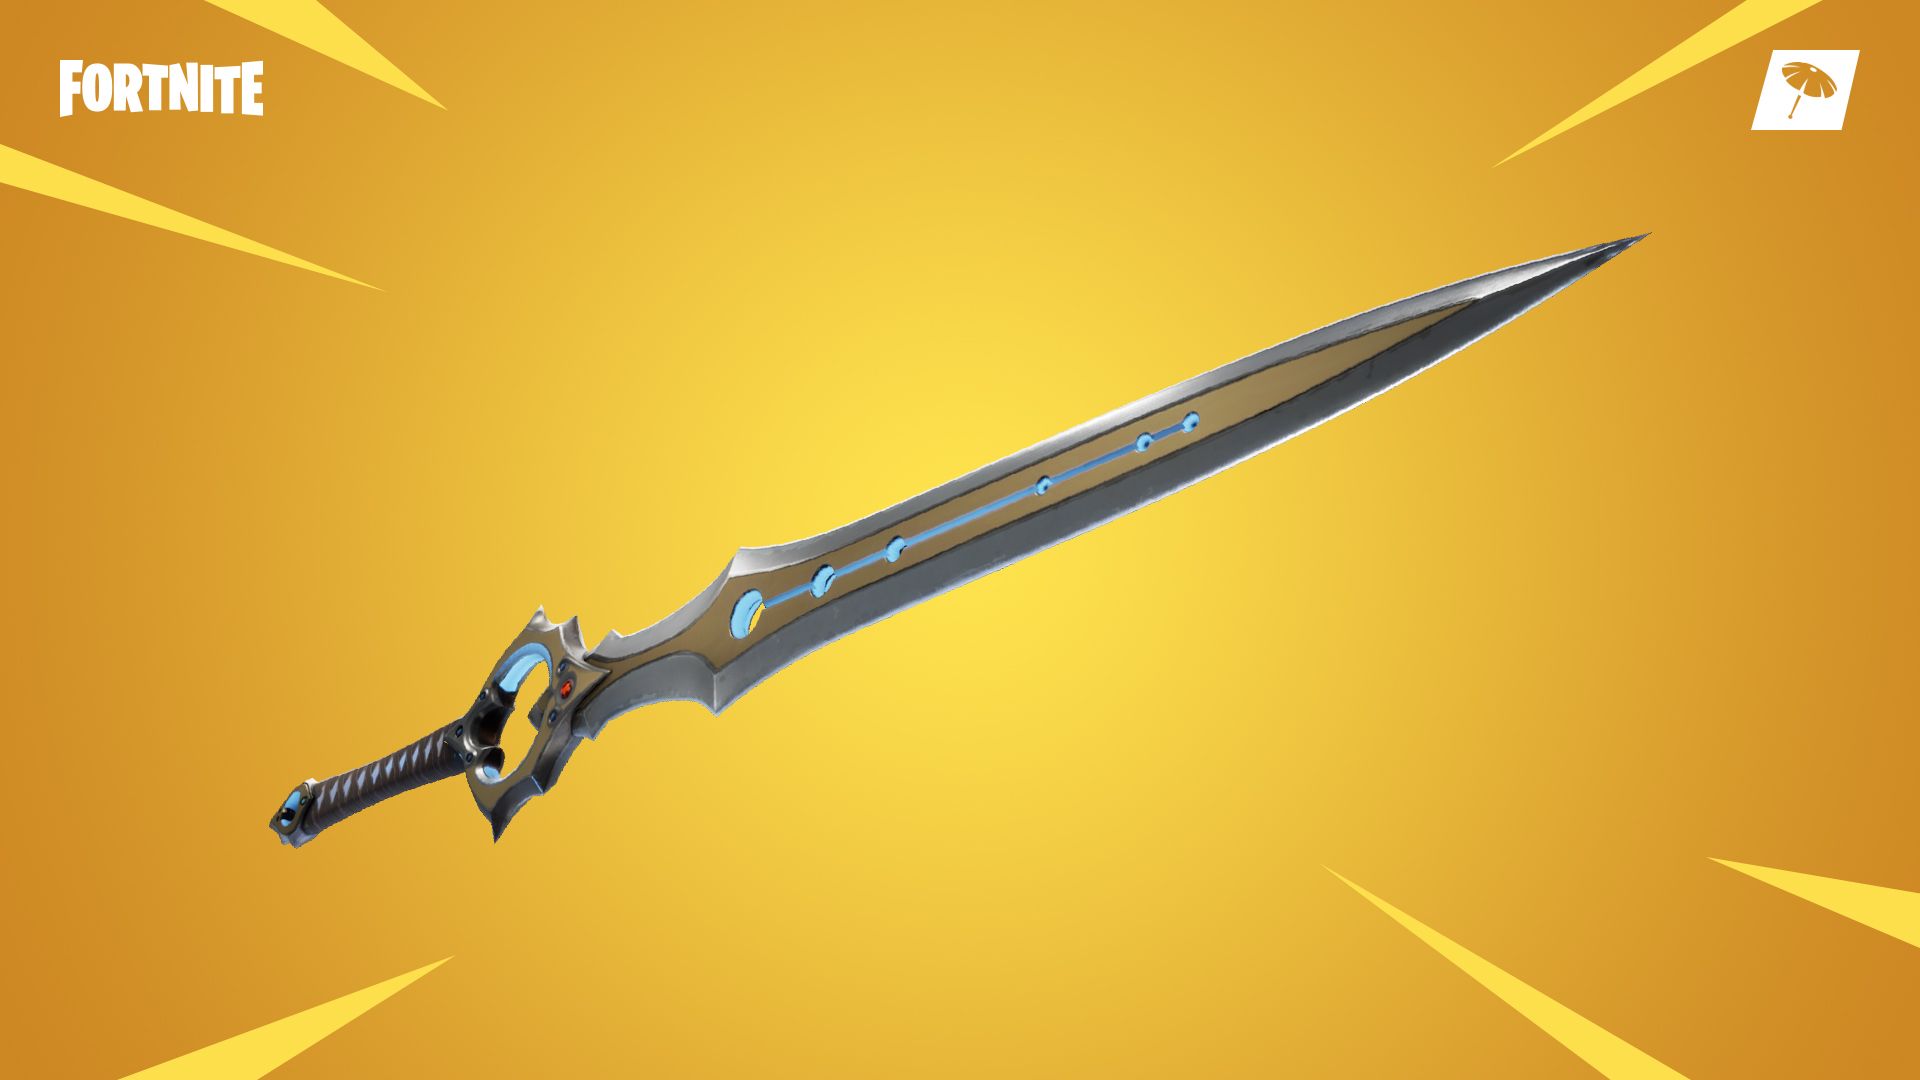 Fortnite's Infinity Blade will be nerfed (kind of...) with Patch v7.10 next week